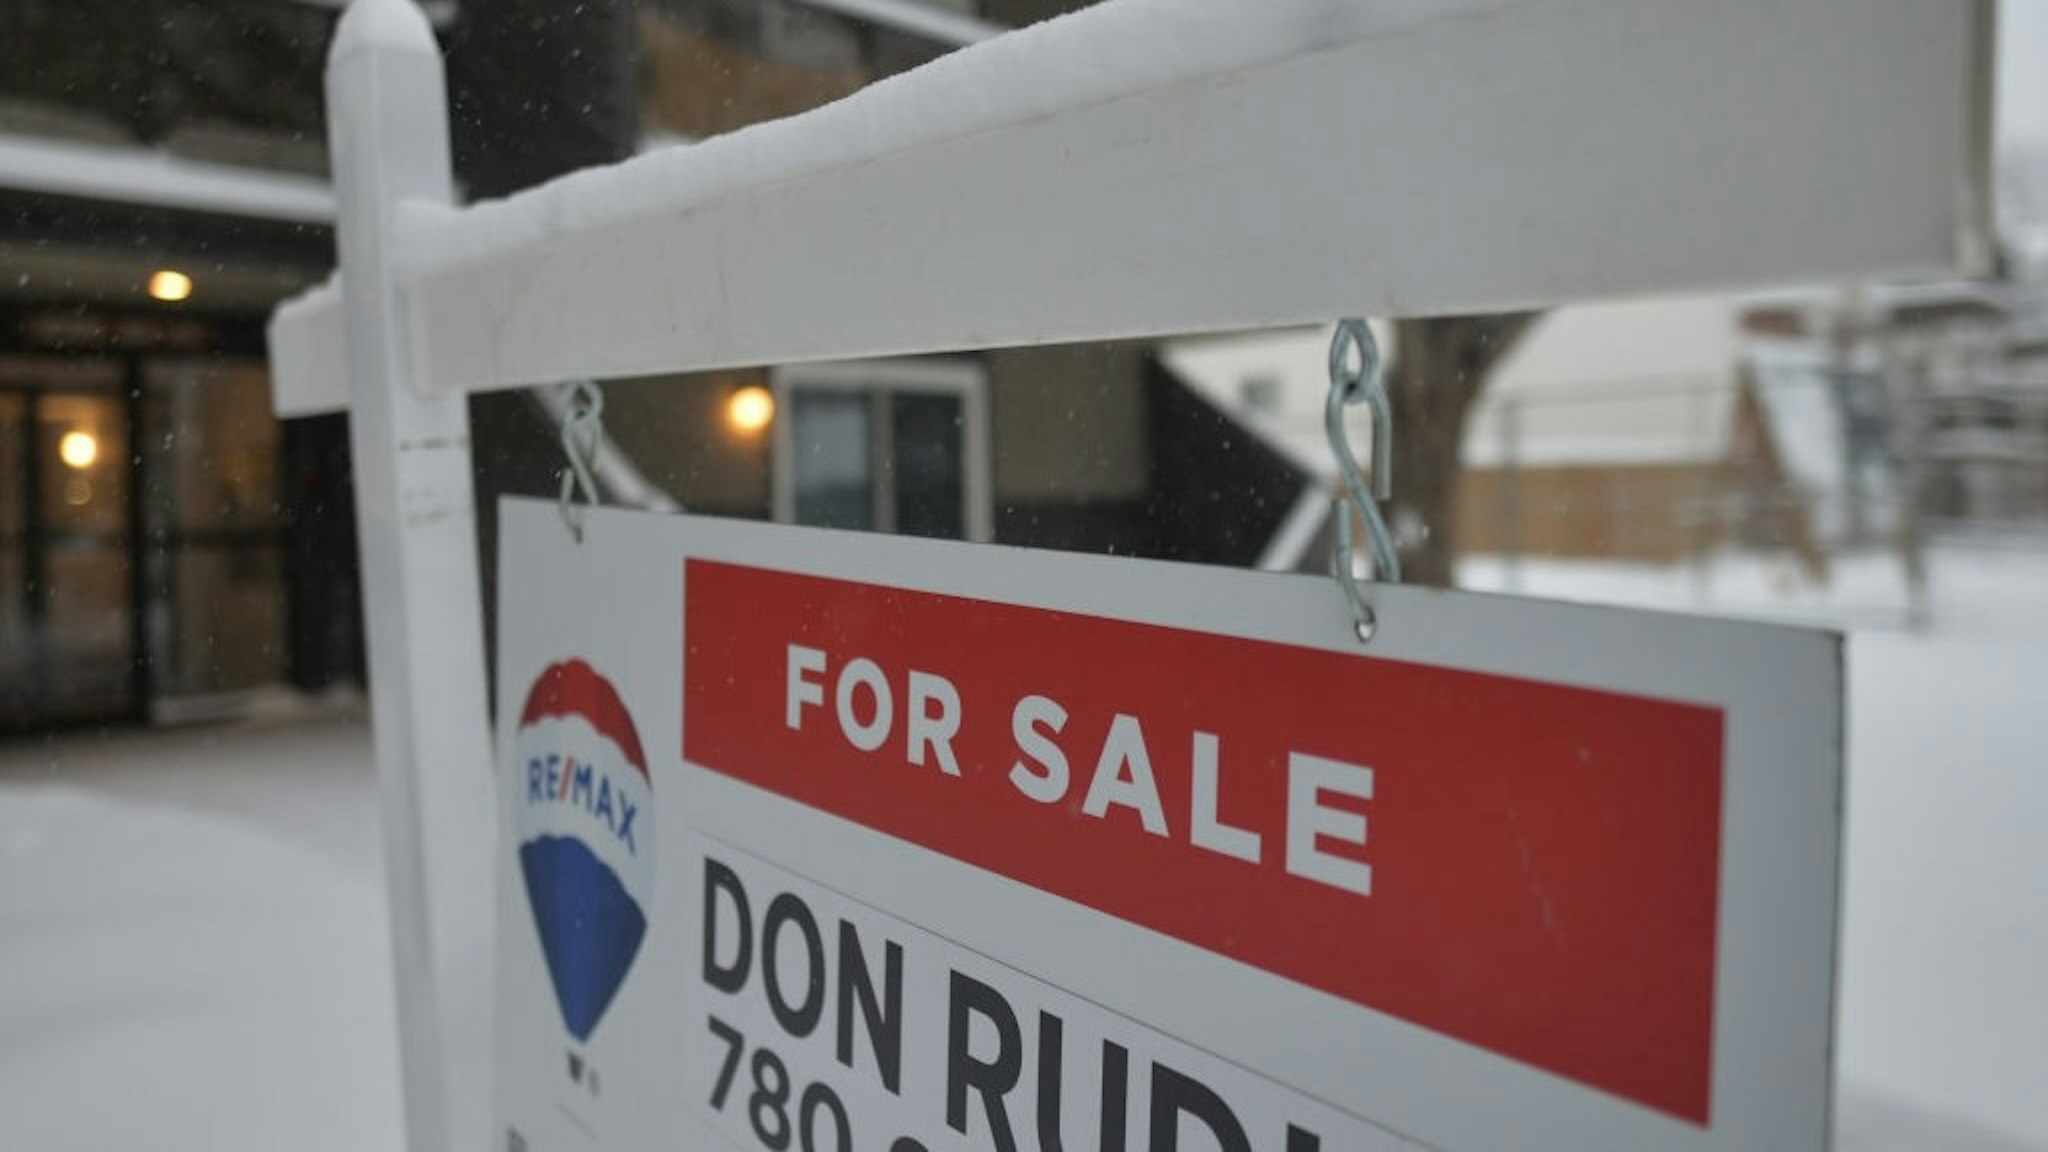 Daily Life In Edmonton During The Covid-19 Pandemic For Sale sign seen outside a house in the center of Edmonton. On Friday, January 7, 2022, in Edmonton, Alberta, Canada. (Photo by Artur Widak/NurPhoto via Getty Images) NurPhoto / Contributor